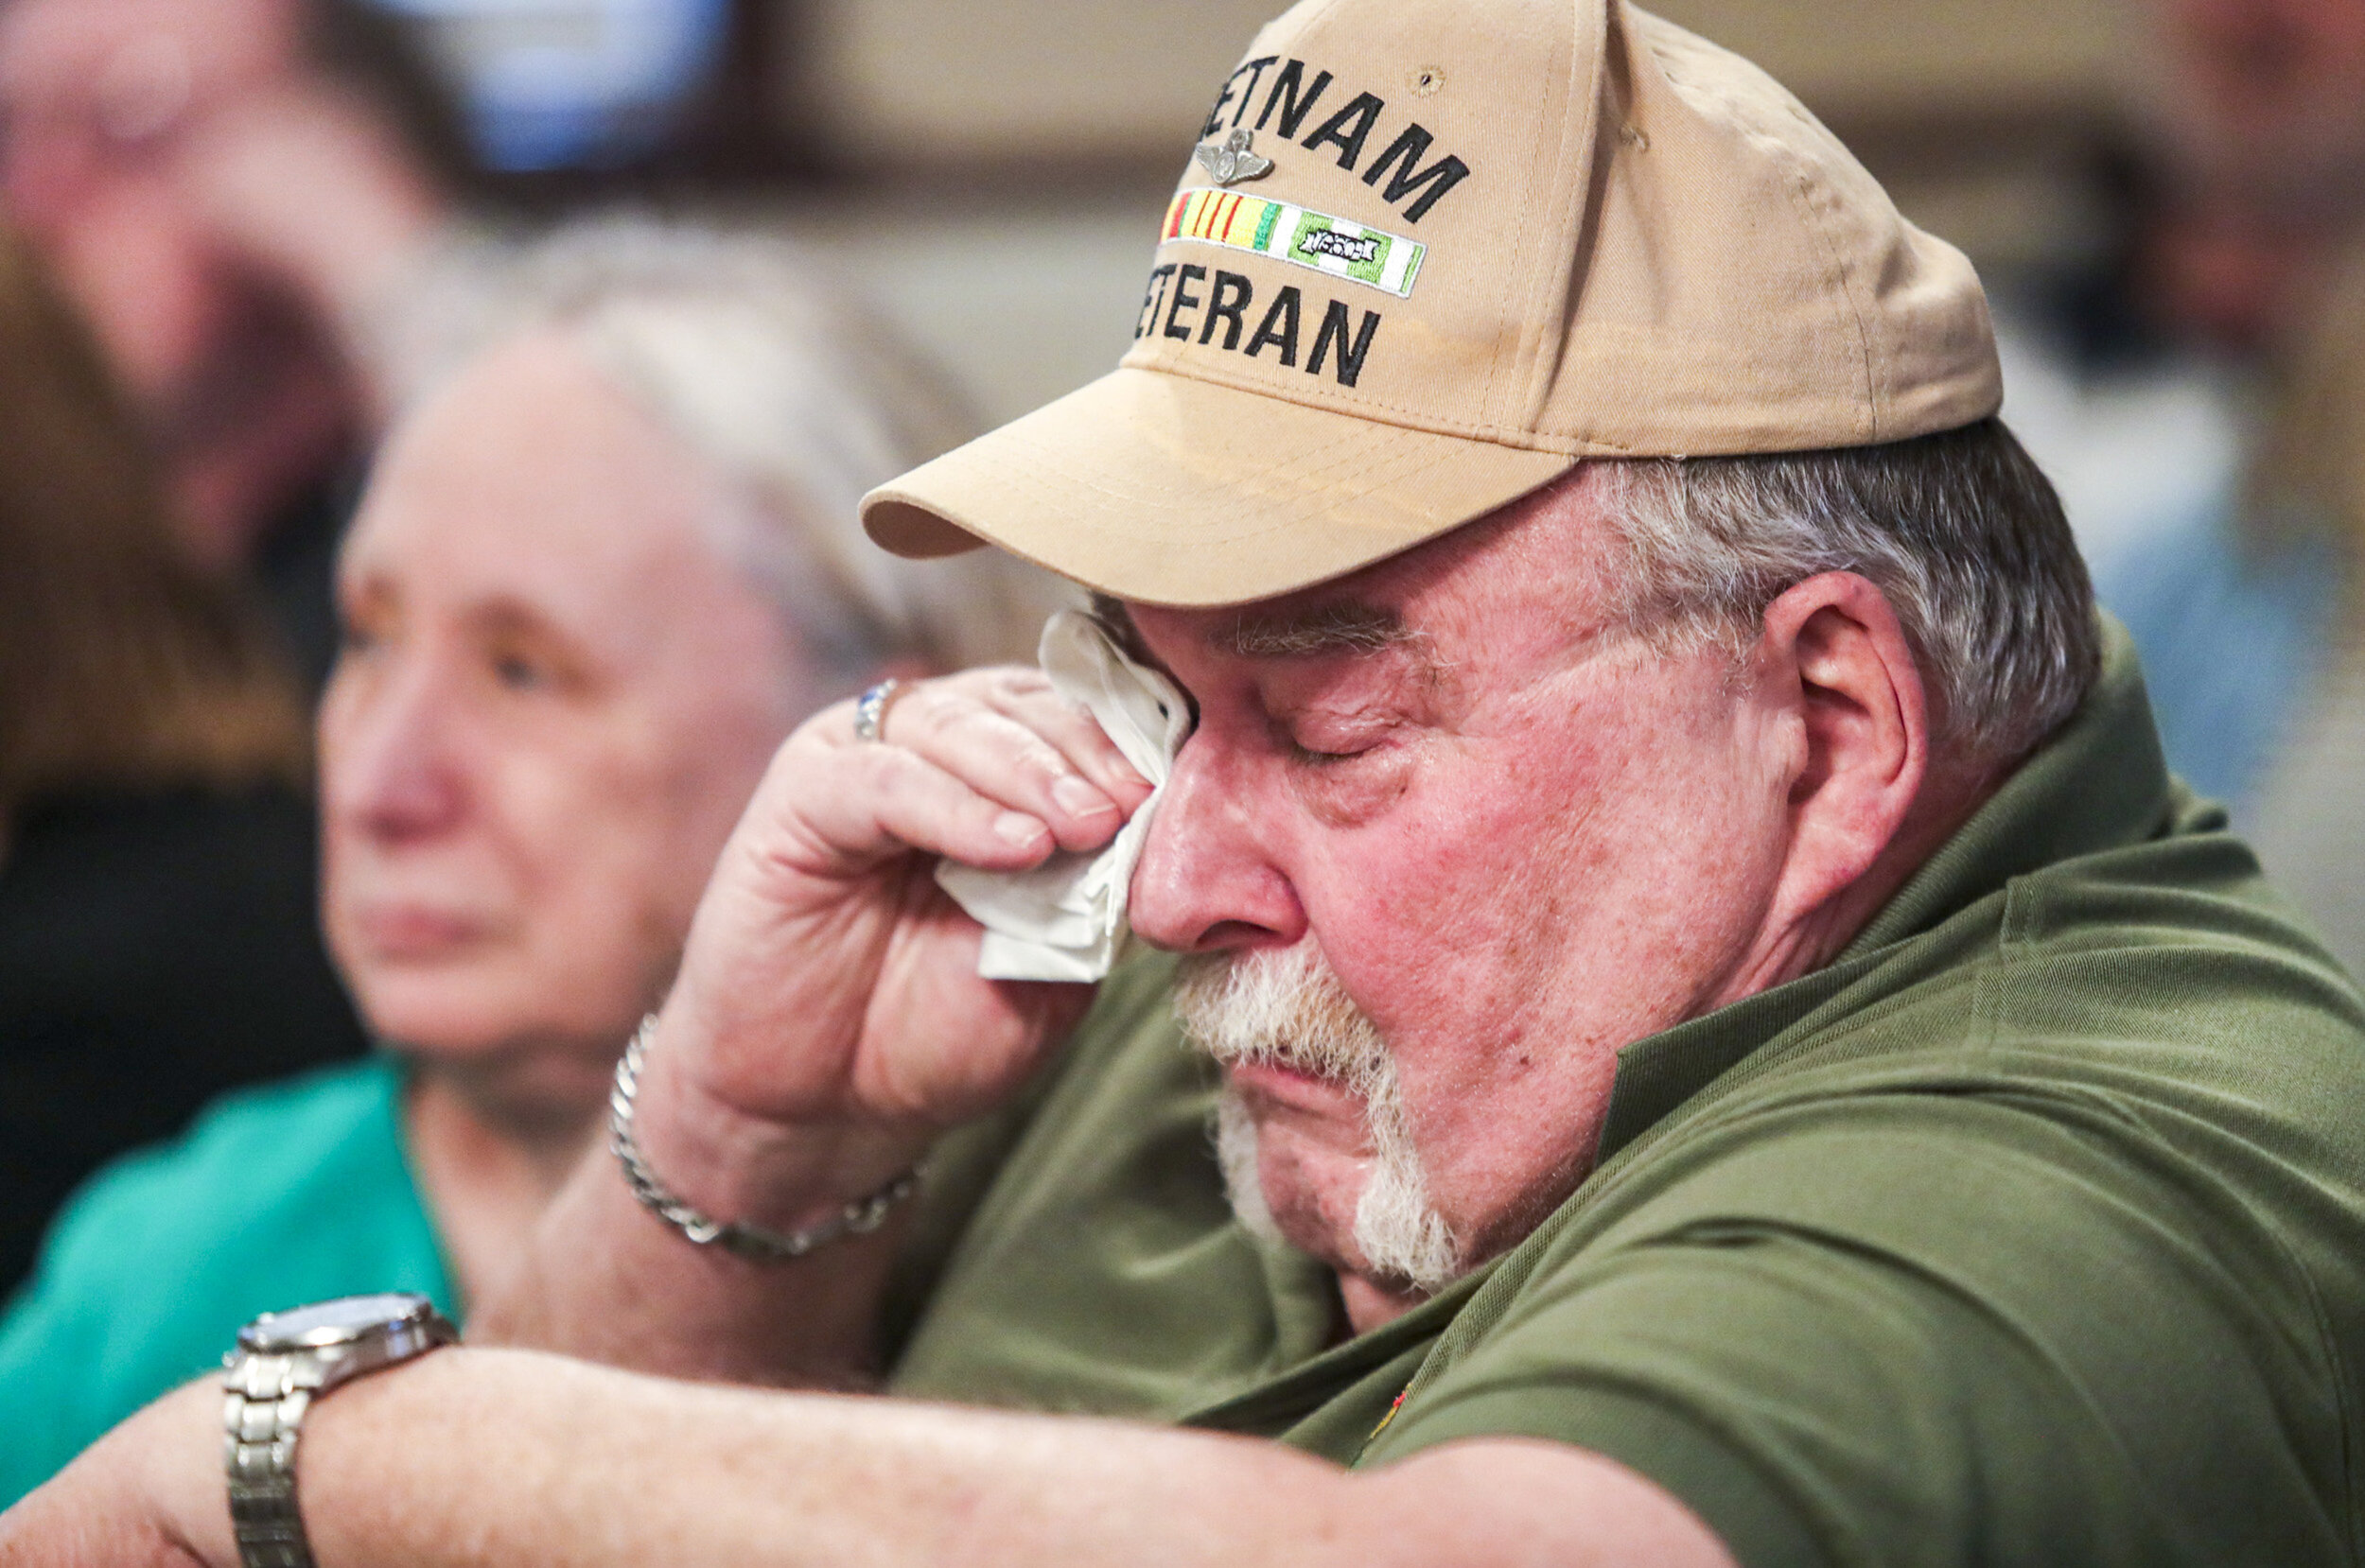  Vietnam veteran Mike Martin of Davenport wipes a tear from his eye as Sen. Amy Klobuchar speaks about her experiences working with the late Sen. John McCain during a meet and greet at Hickory Garden Family Restaurant in Davenport, Iowa, Sunday. 